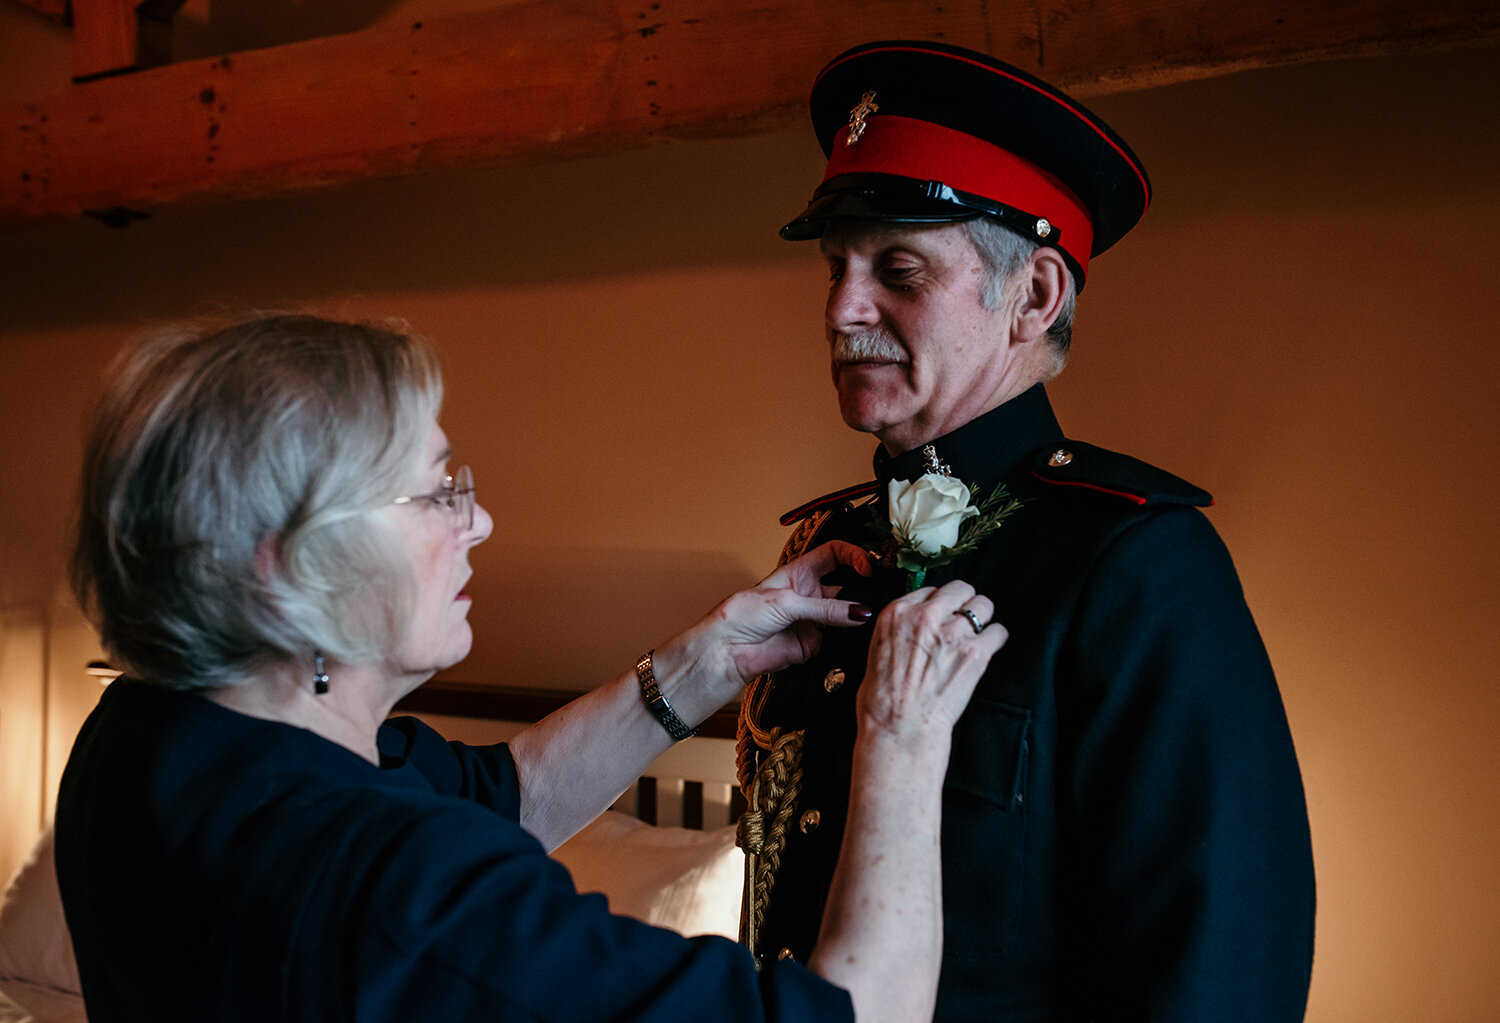 The groom having his button hole fixed to his jacket